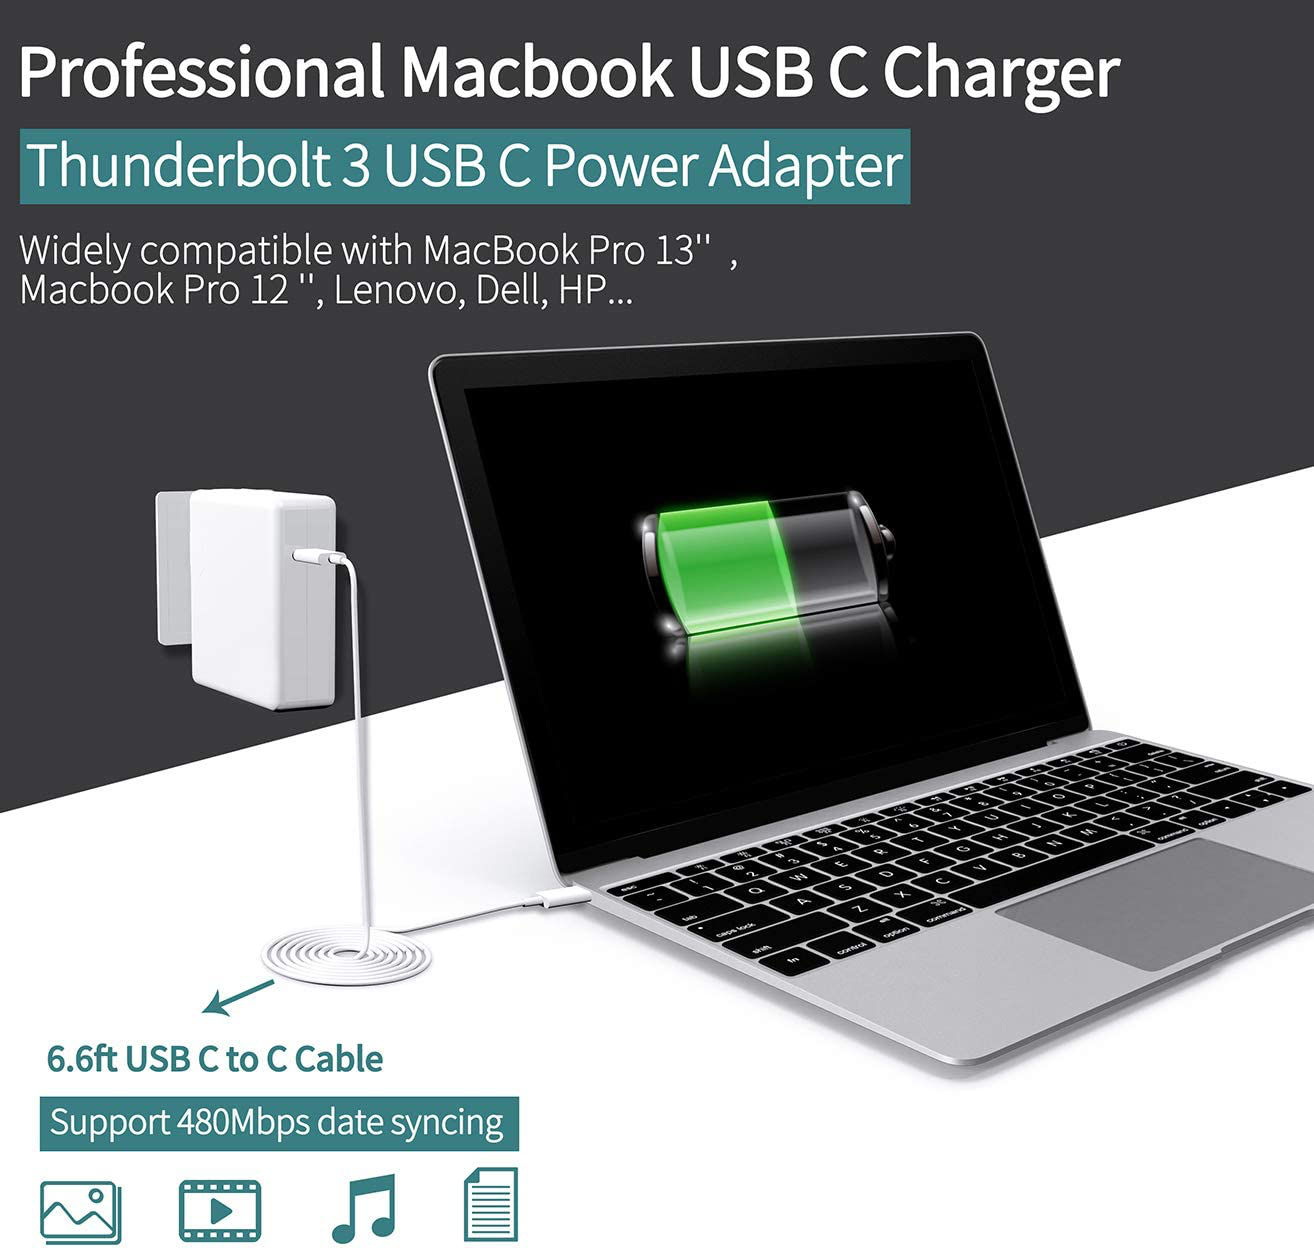 Replacement Mac Book Pro Charger, 61W USB C Charger Power Adapter for MacBook Pro 13 Inch 12 Inch, MacBook 13 Inch 12 Inch, MacBook Air 2018, ipad pro,Included USB-C to USB-C Charge Cable (6.6ft/2m)